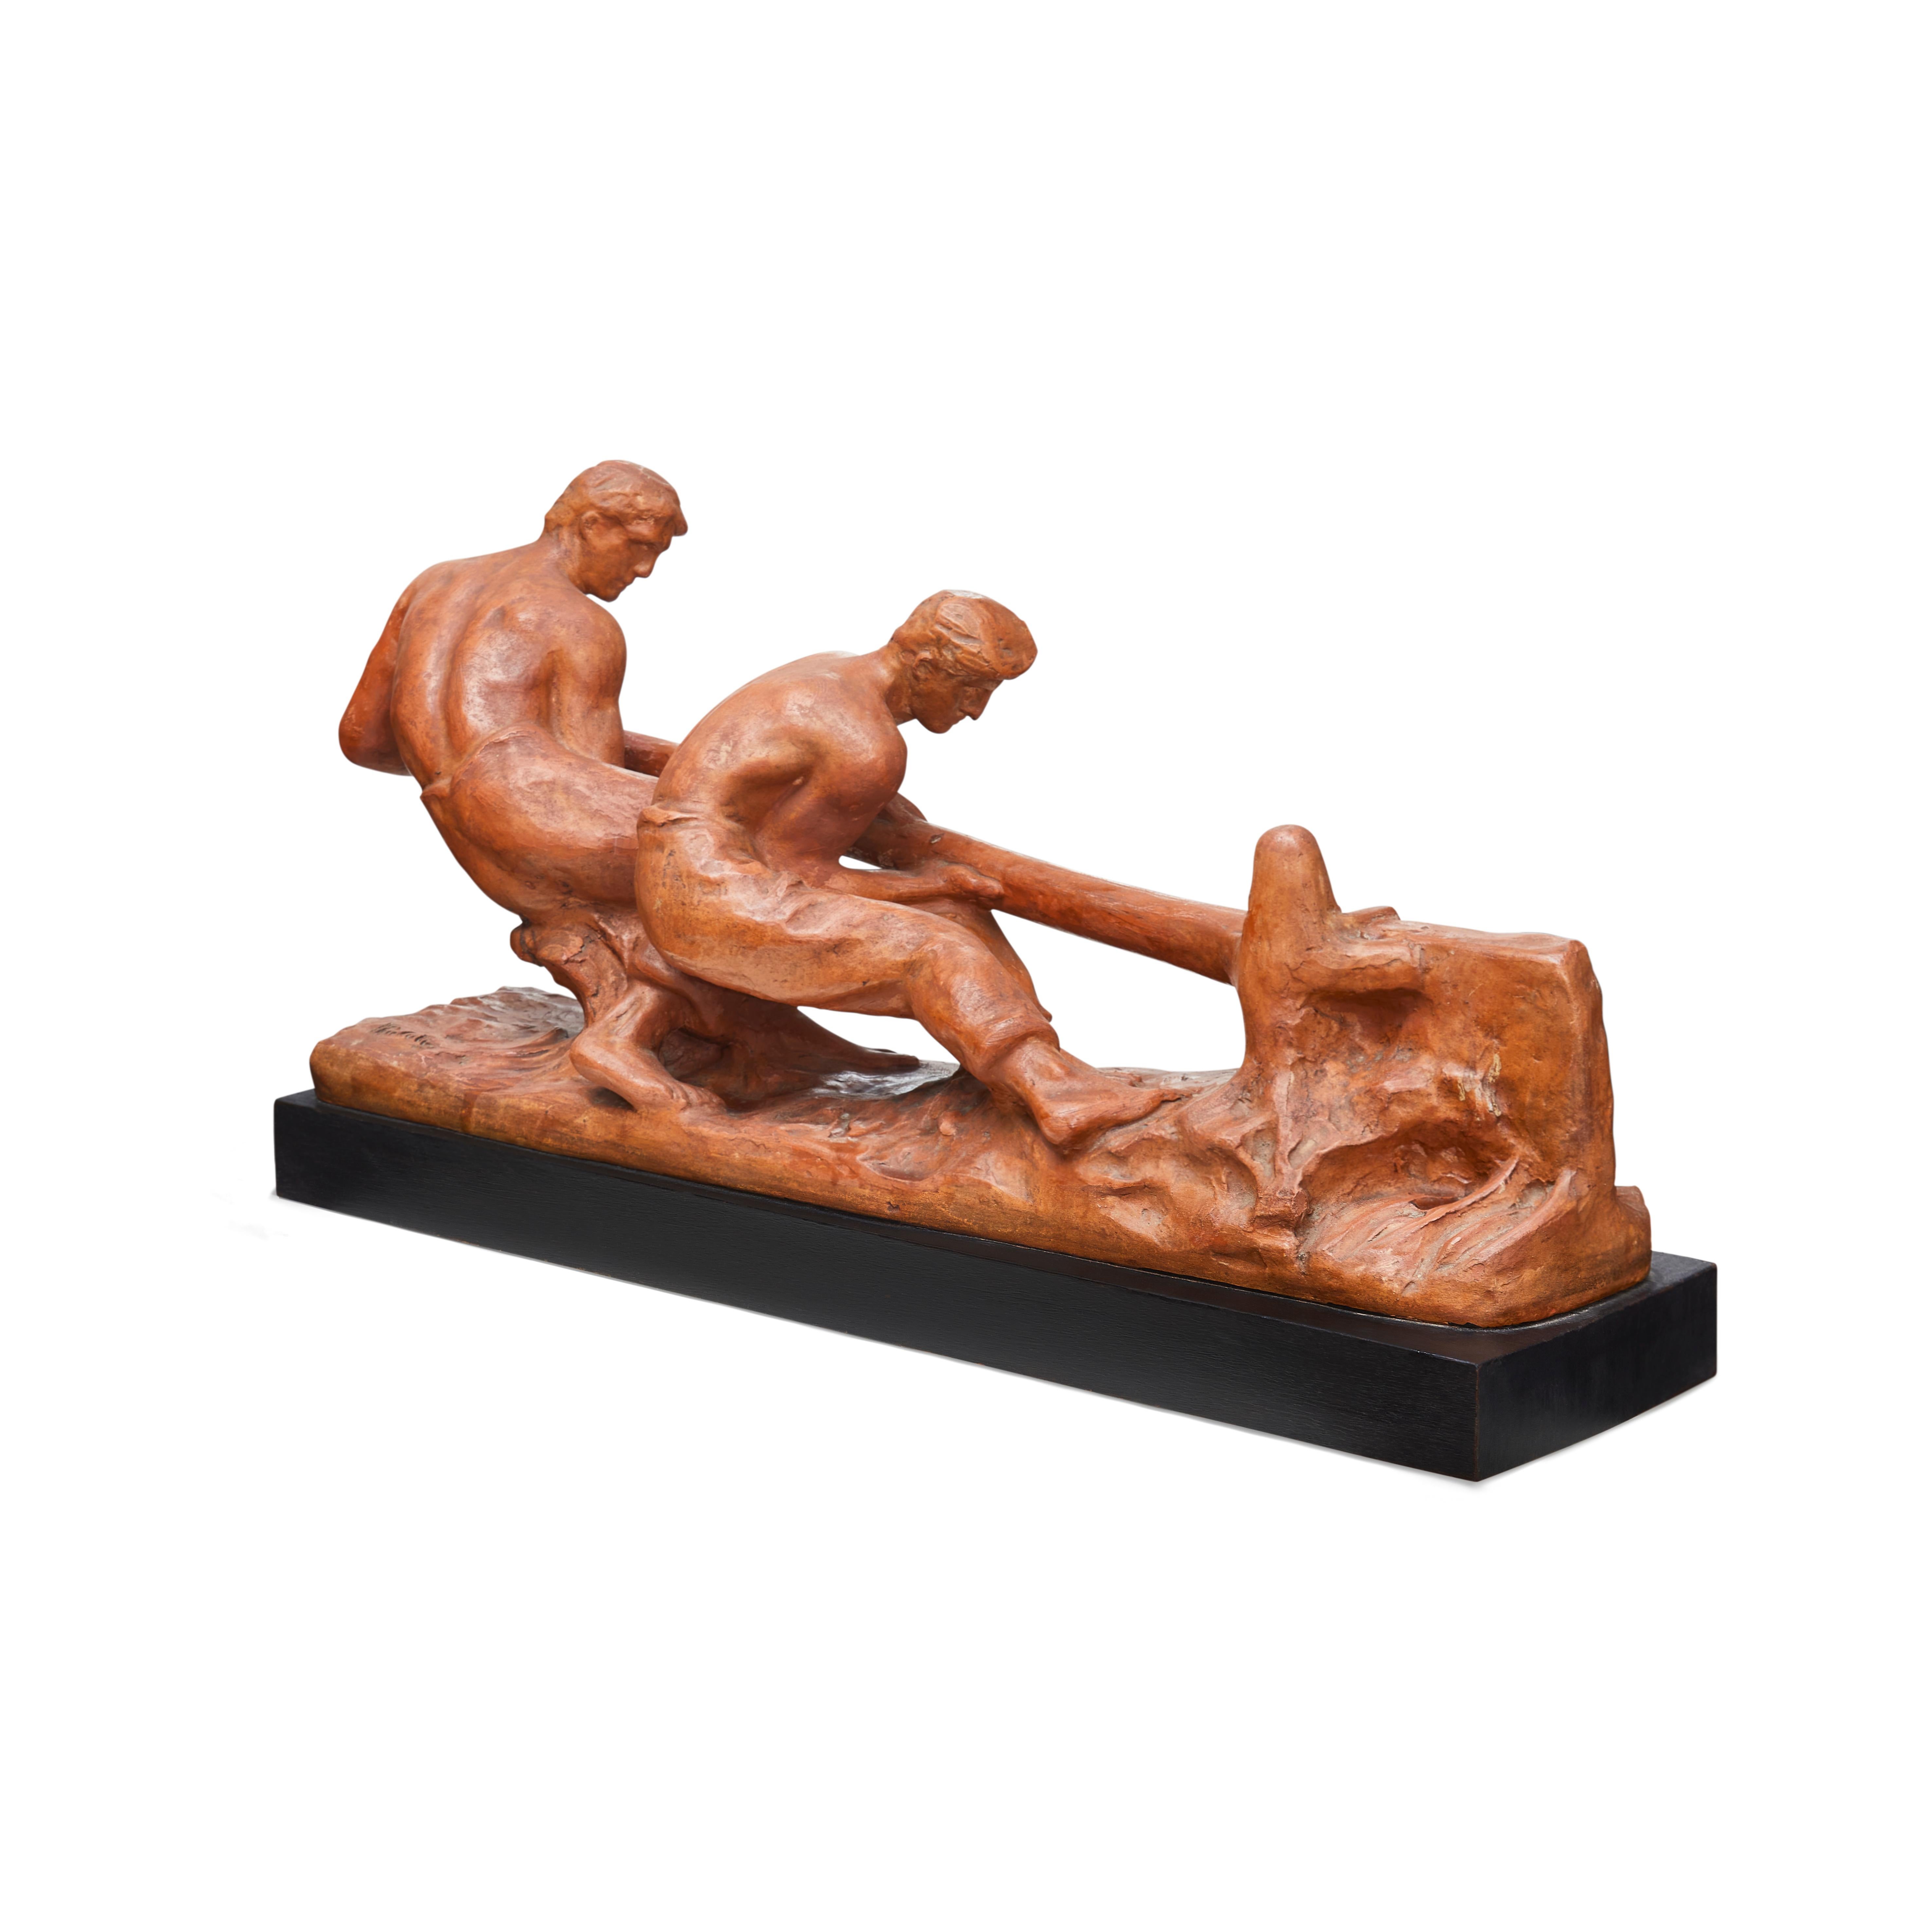 Well sized Art Deco patinated terracotta figural group sitting on an ebonised wooden plinth. This sculpture shows great fluidity of movement of men toiling, most likely opening a lock on a canal. Signed. Probably Belgium, circa 1930s.